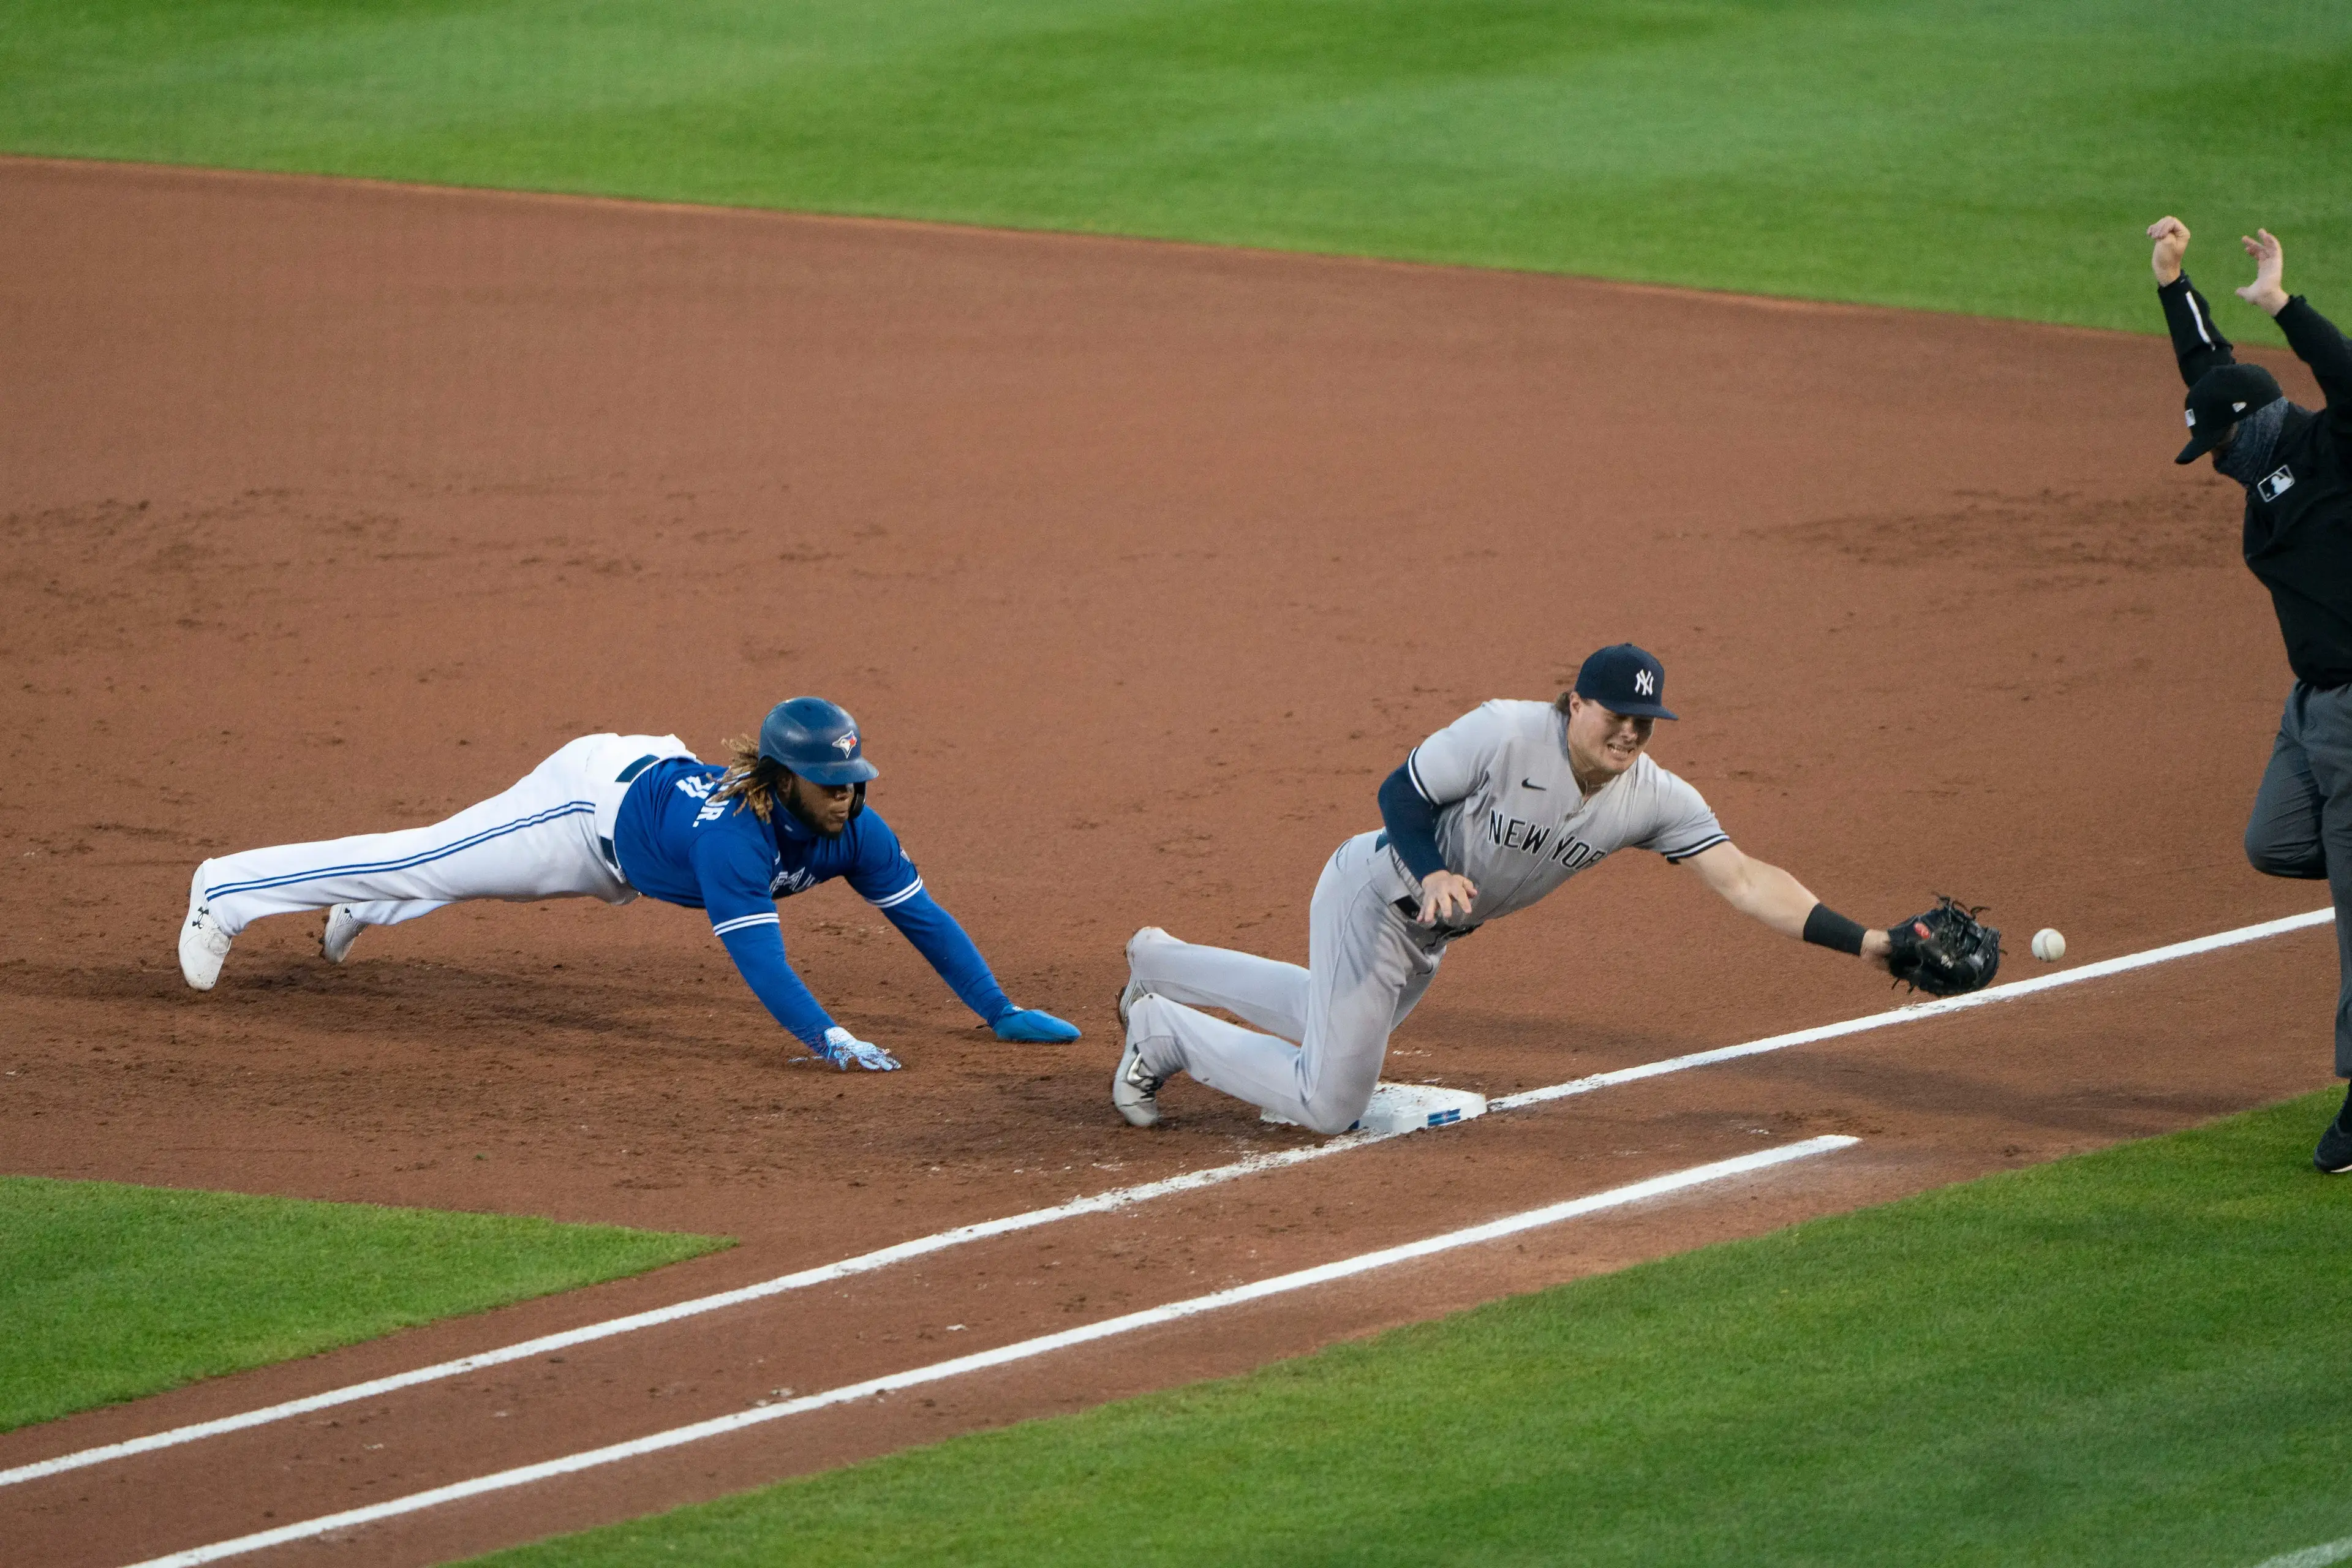 Sep 23, 2020; Buffalo, New York, USA; New York Yankees catcher Gary Sanchez (24) (not pictured) throws the ball wide of New York Yankees first baseman Luke Voit (59) with Toronto Blue Jays first baseman Vladimir Guerrero Jr. (27) diving back to the base during the first inning at Sahlen Field. Mandatory Credit: Gregory Fisher-USA TODAY Sports / © Gregory Fisher-USA TODAY Sports